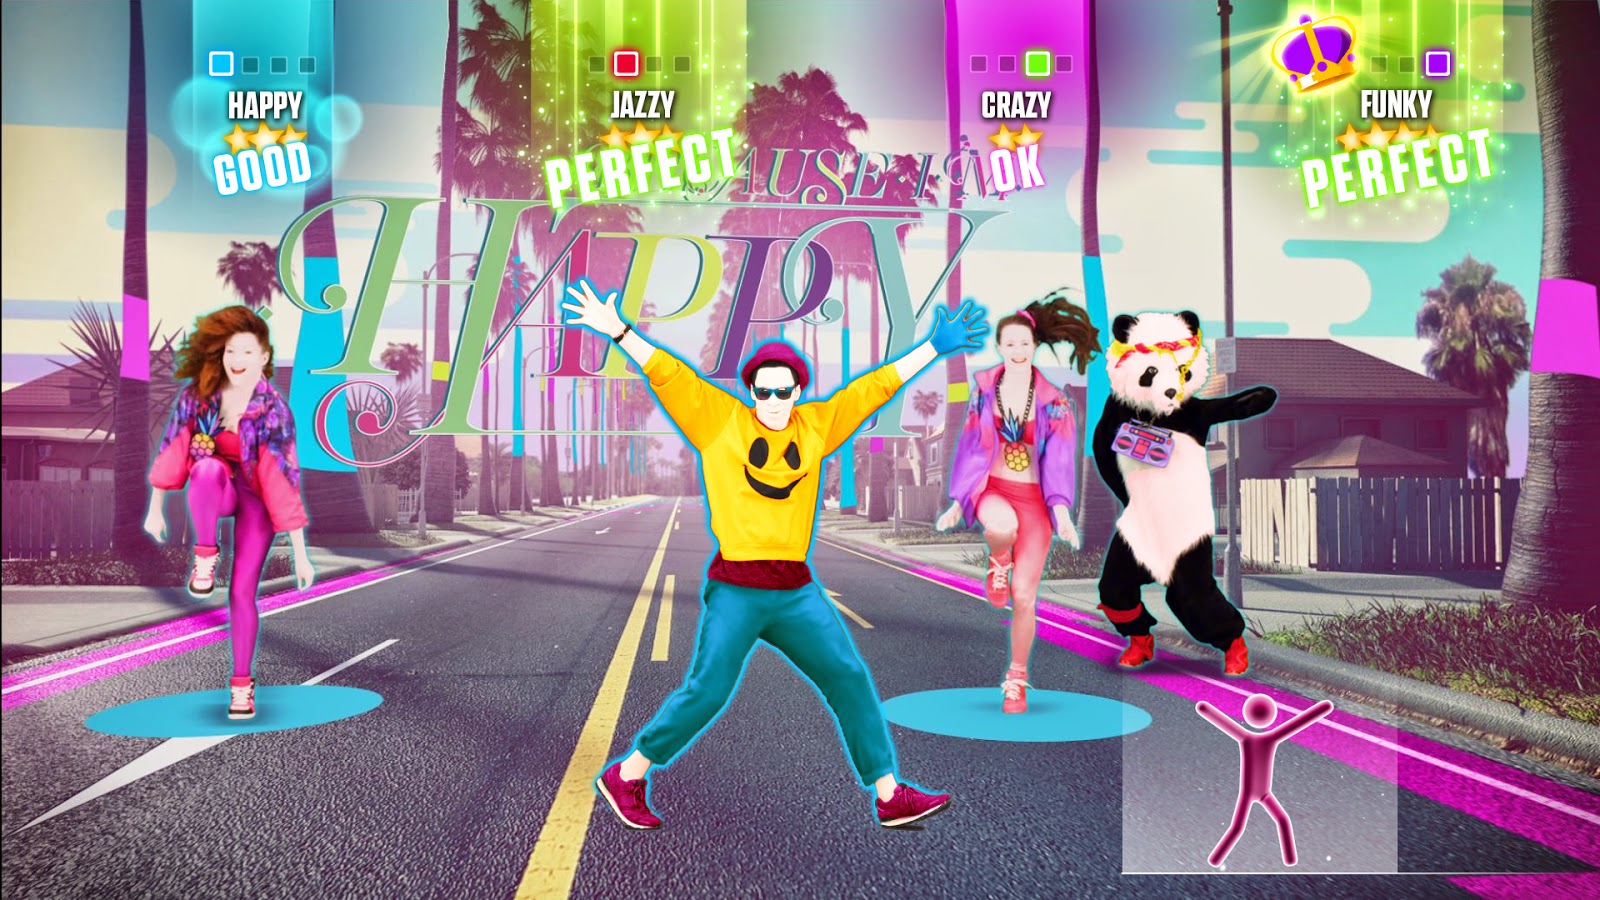 Just Dance 2015 is one of the best selling Amazon games